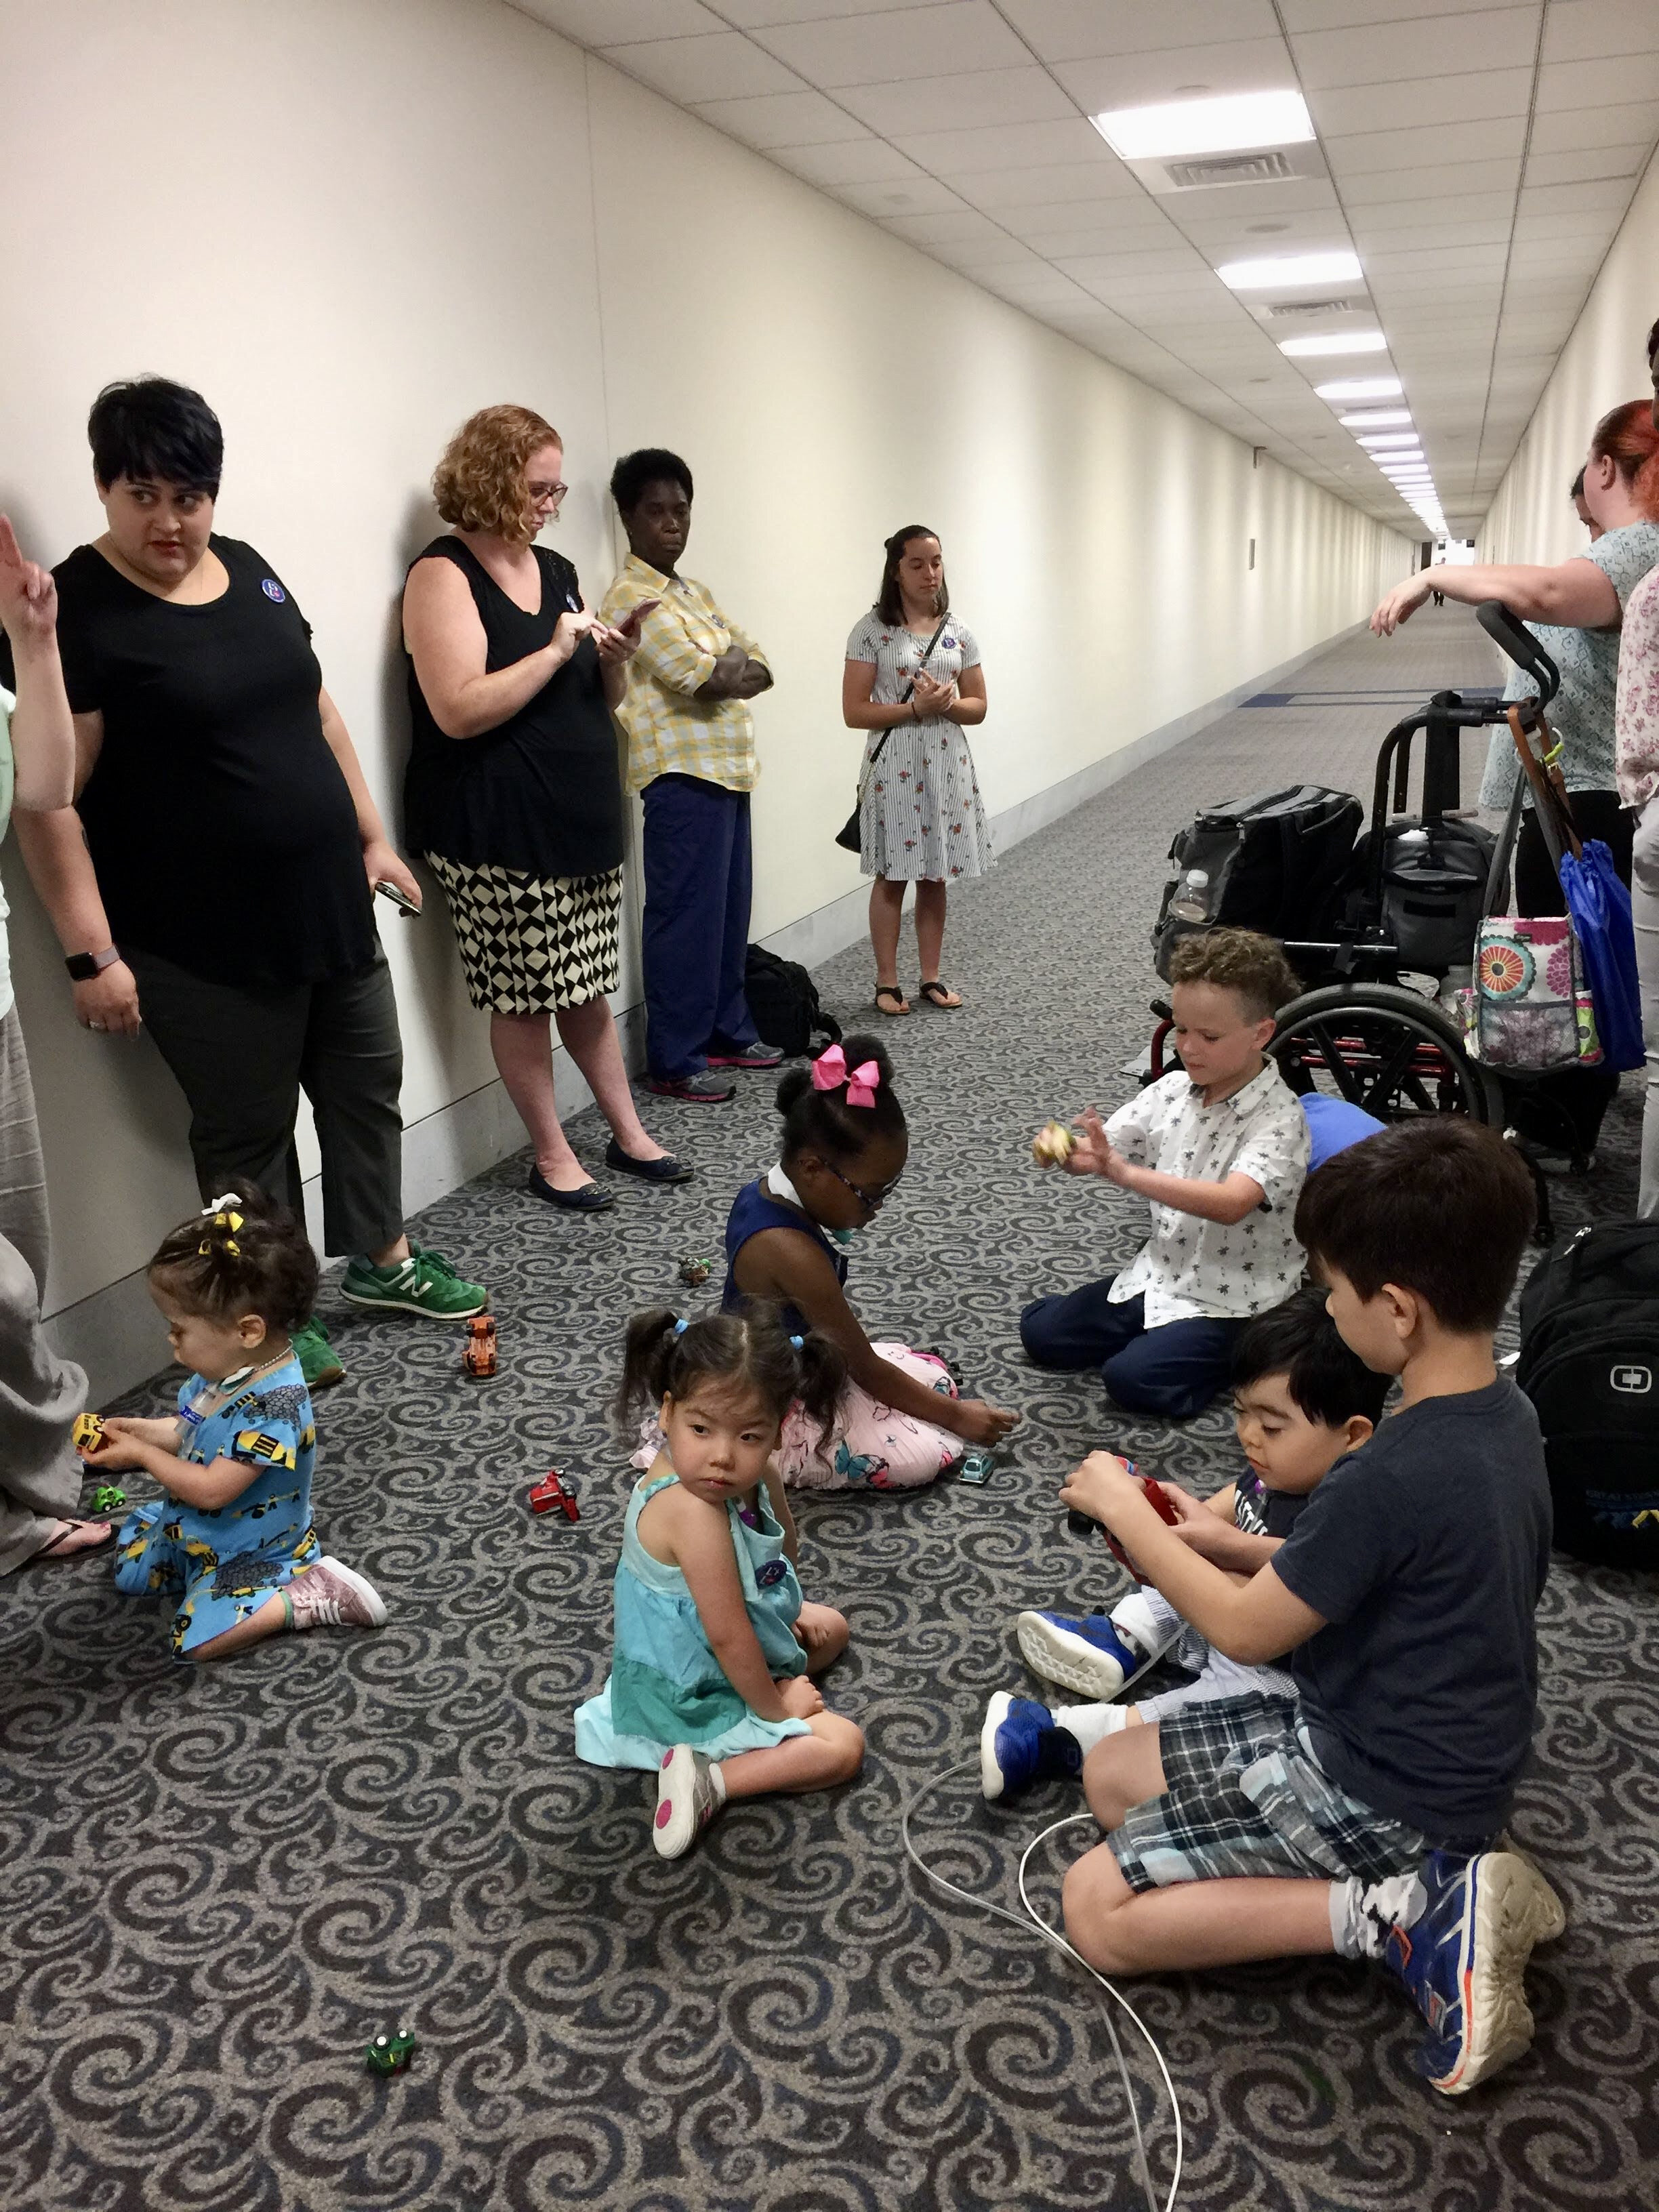  Little Lobbyists families sit and stand along a carpeted hallway in a congressional office building. 